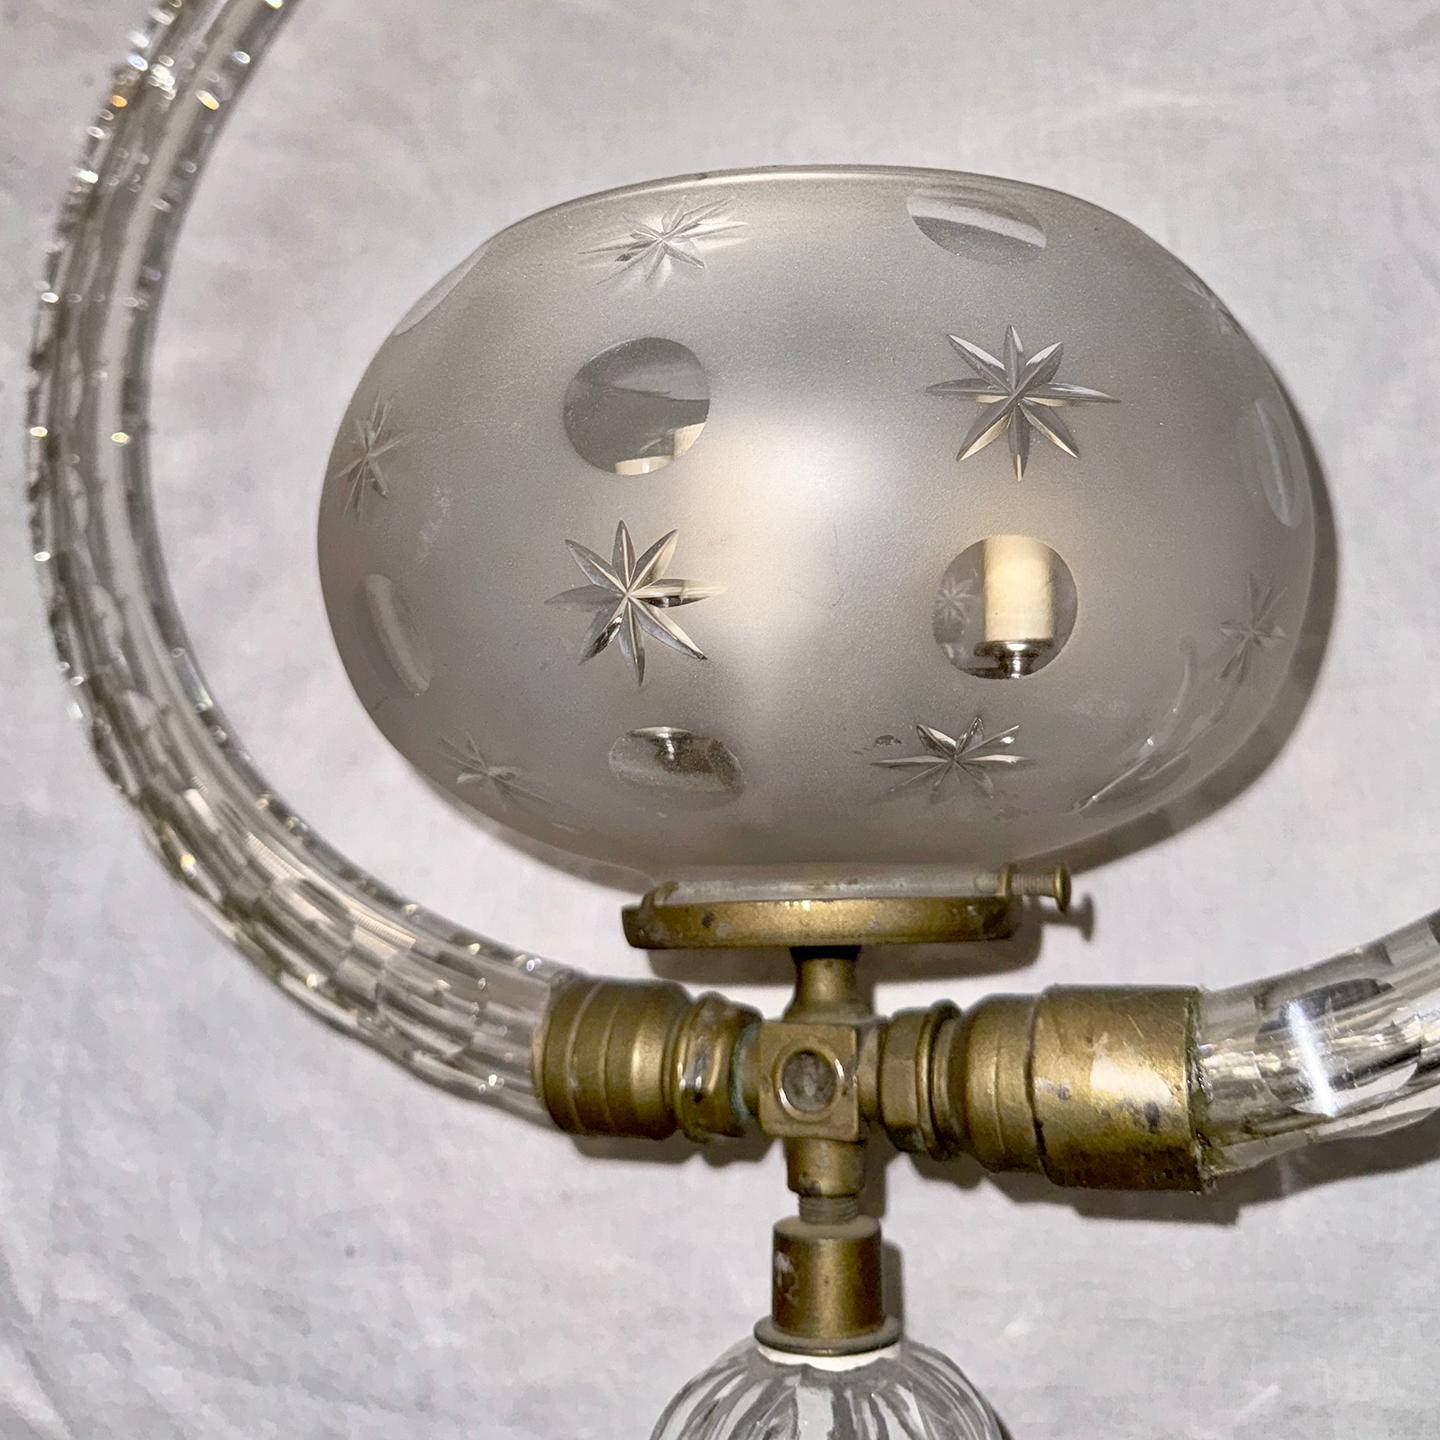 A circa 1920's English cut crystal light fixture with 3 candelabra interior lights.

Measurements:
Height:35